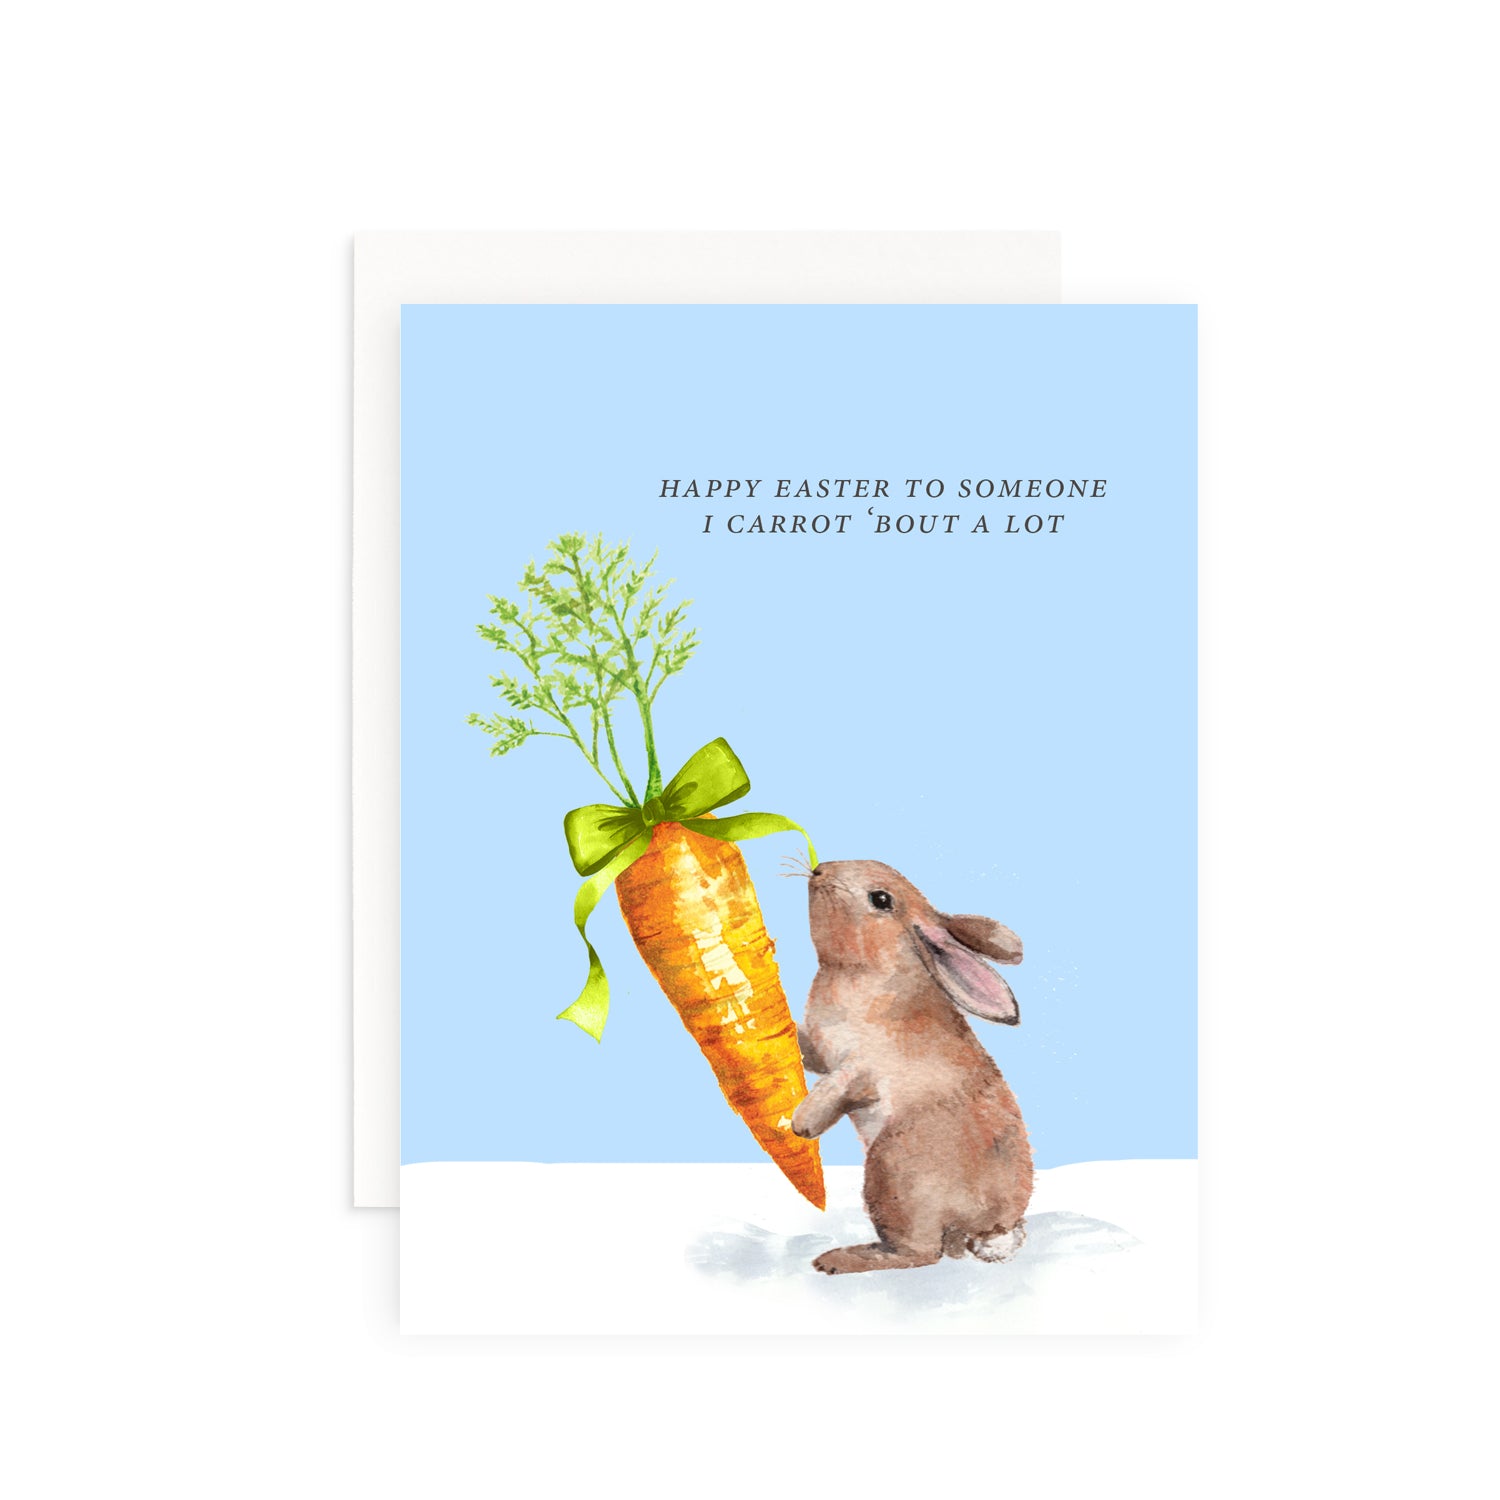 Carrot 'Bout A Lot Greeting Card